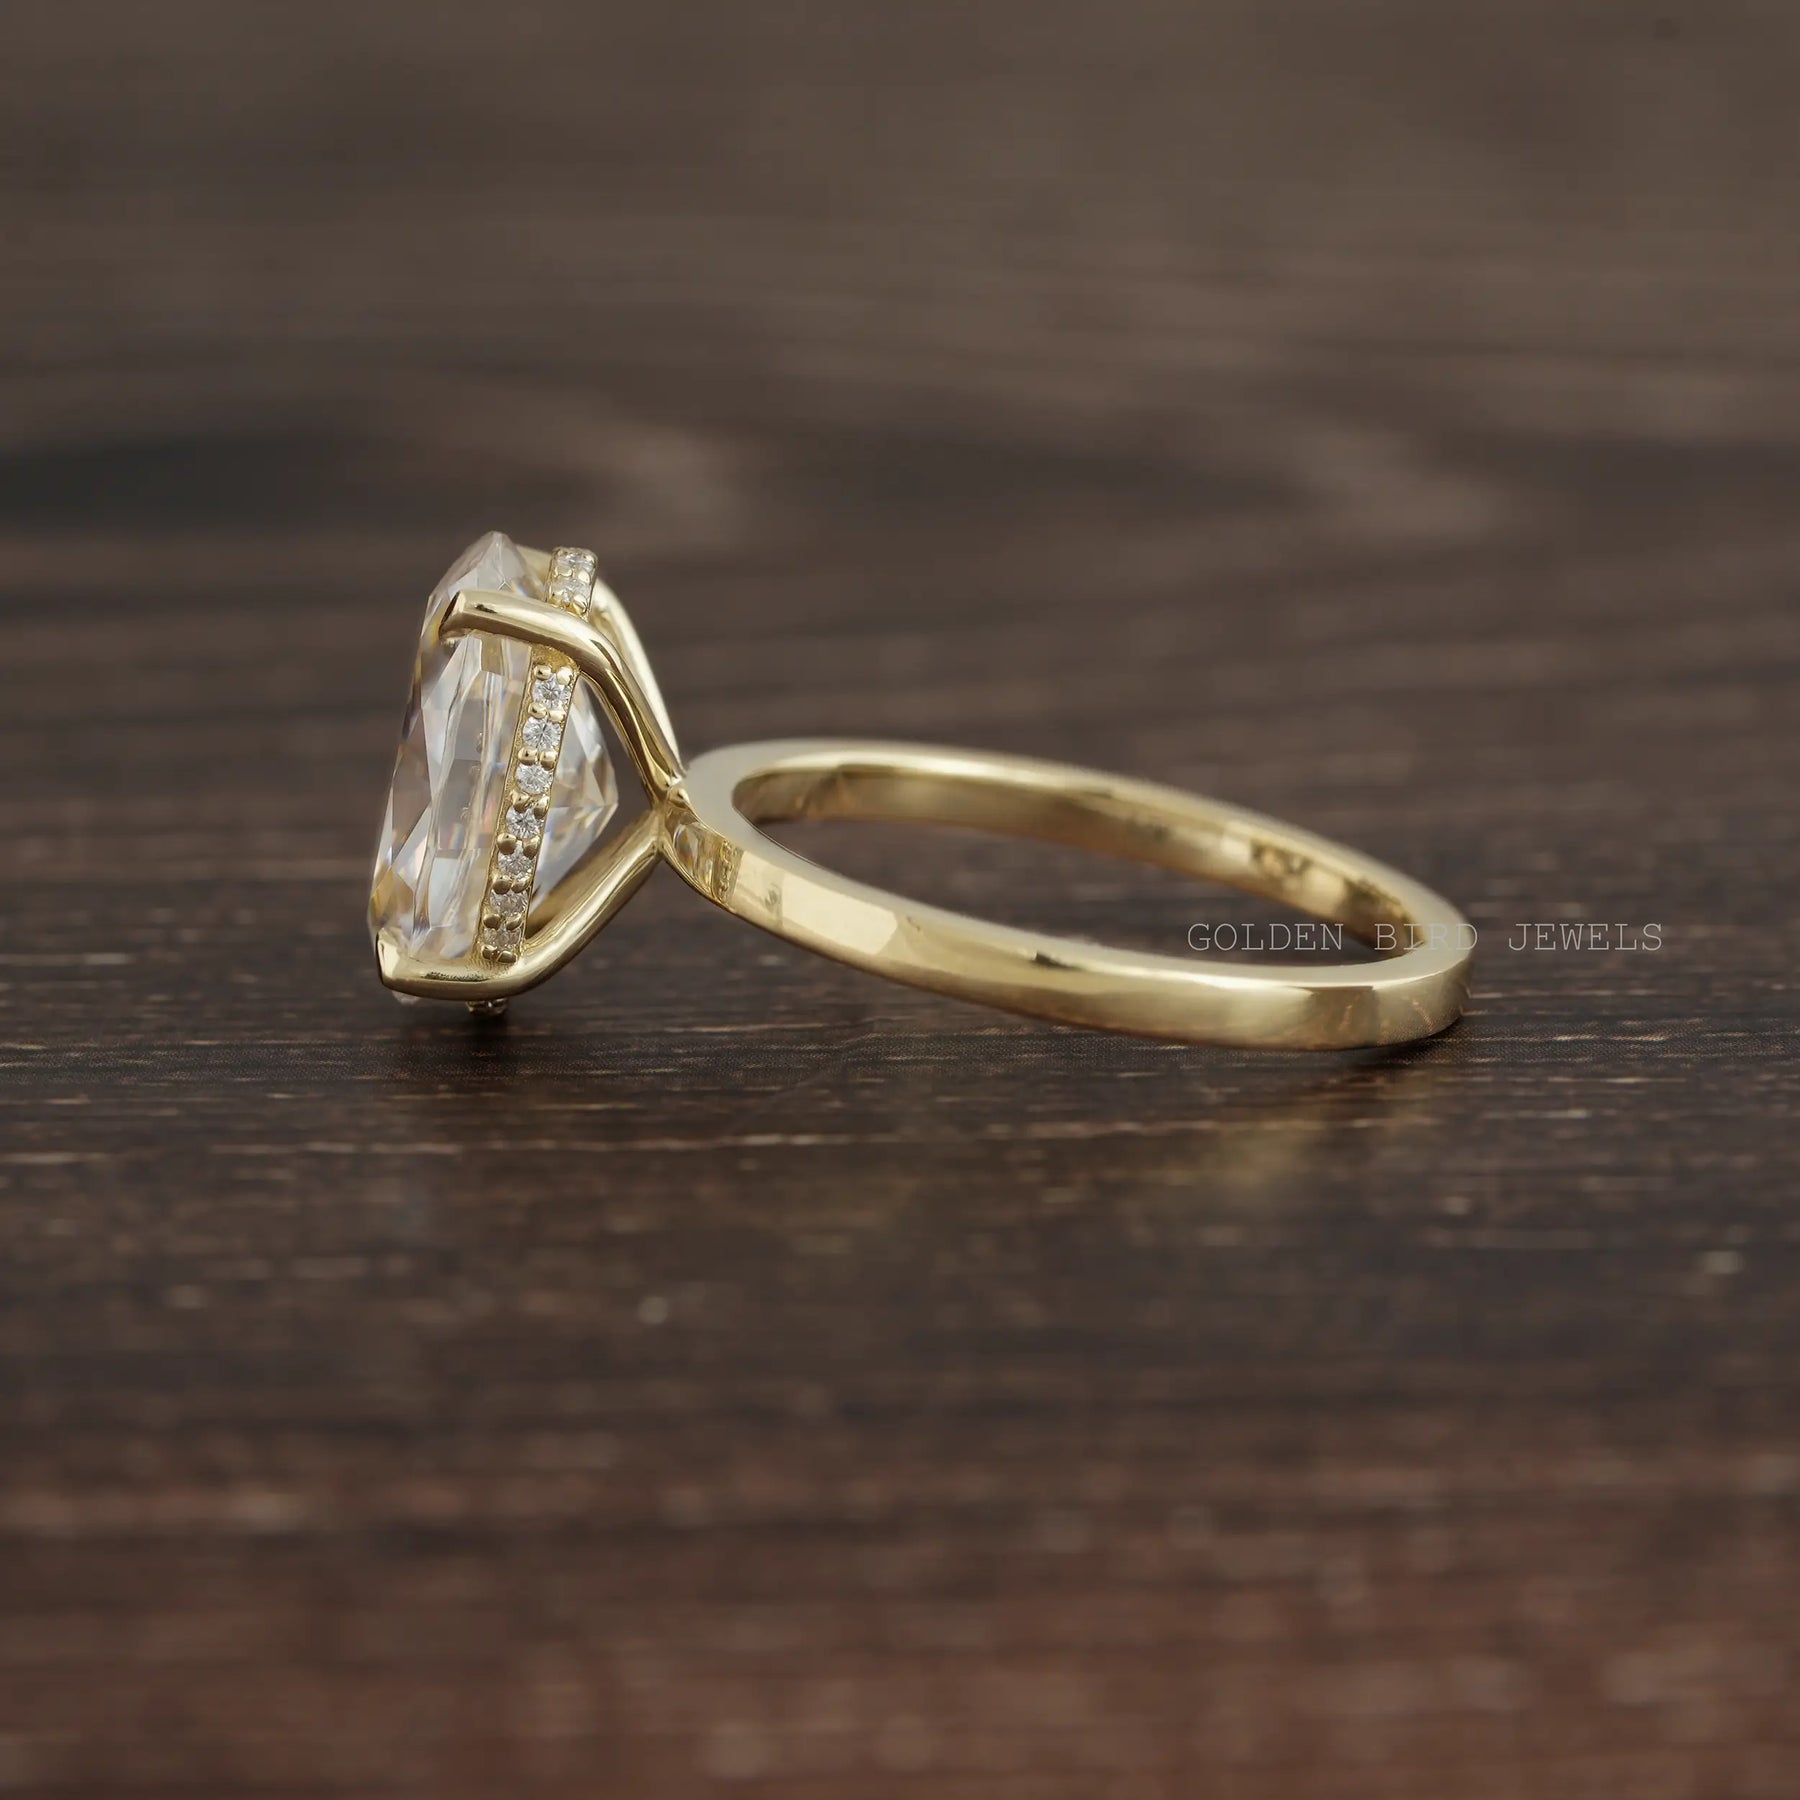 [Moissanite Oval Cut Solitaire Ring In Yellow Gold]-[Golden Bird Jewels]